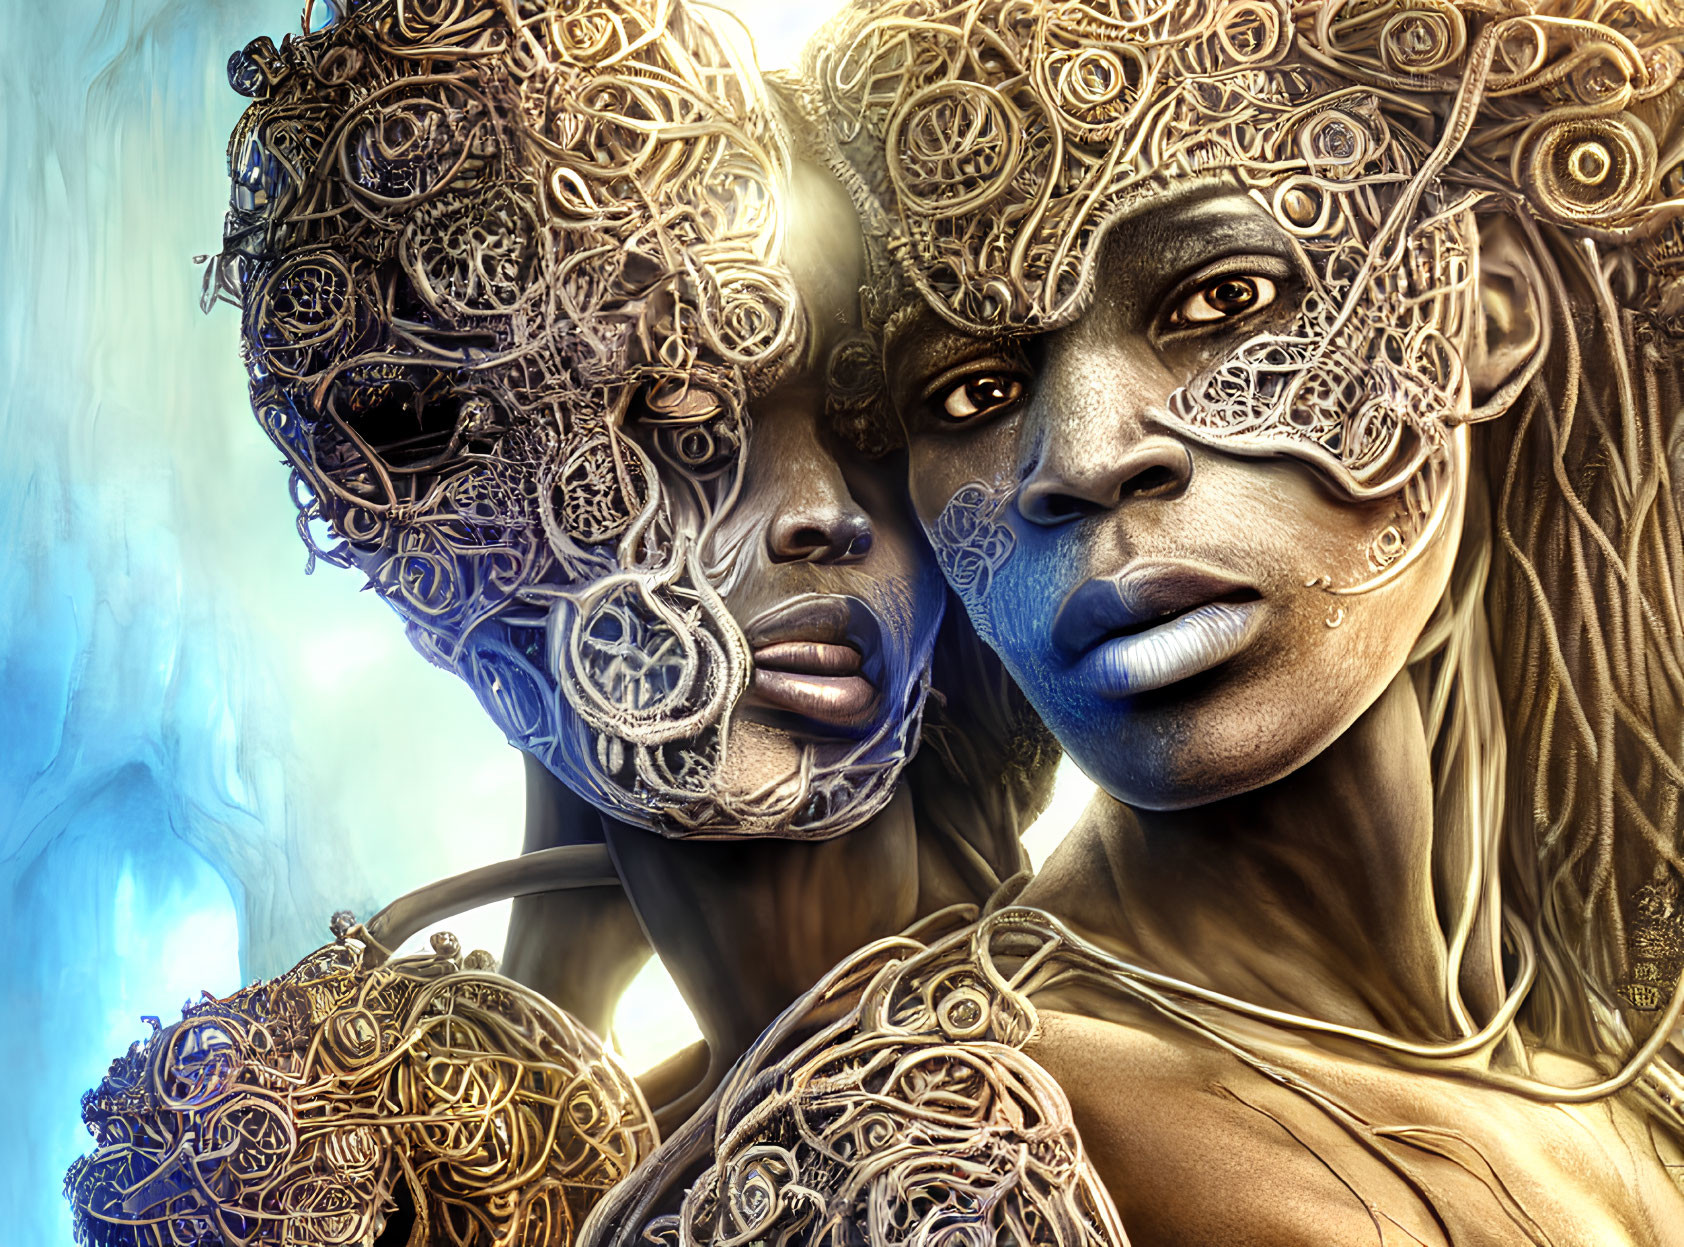 Intricate mechanical and organic faces blend technology with humanity